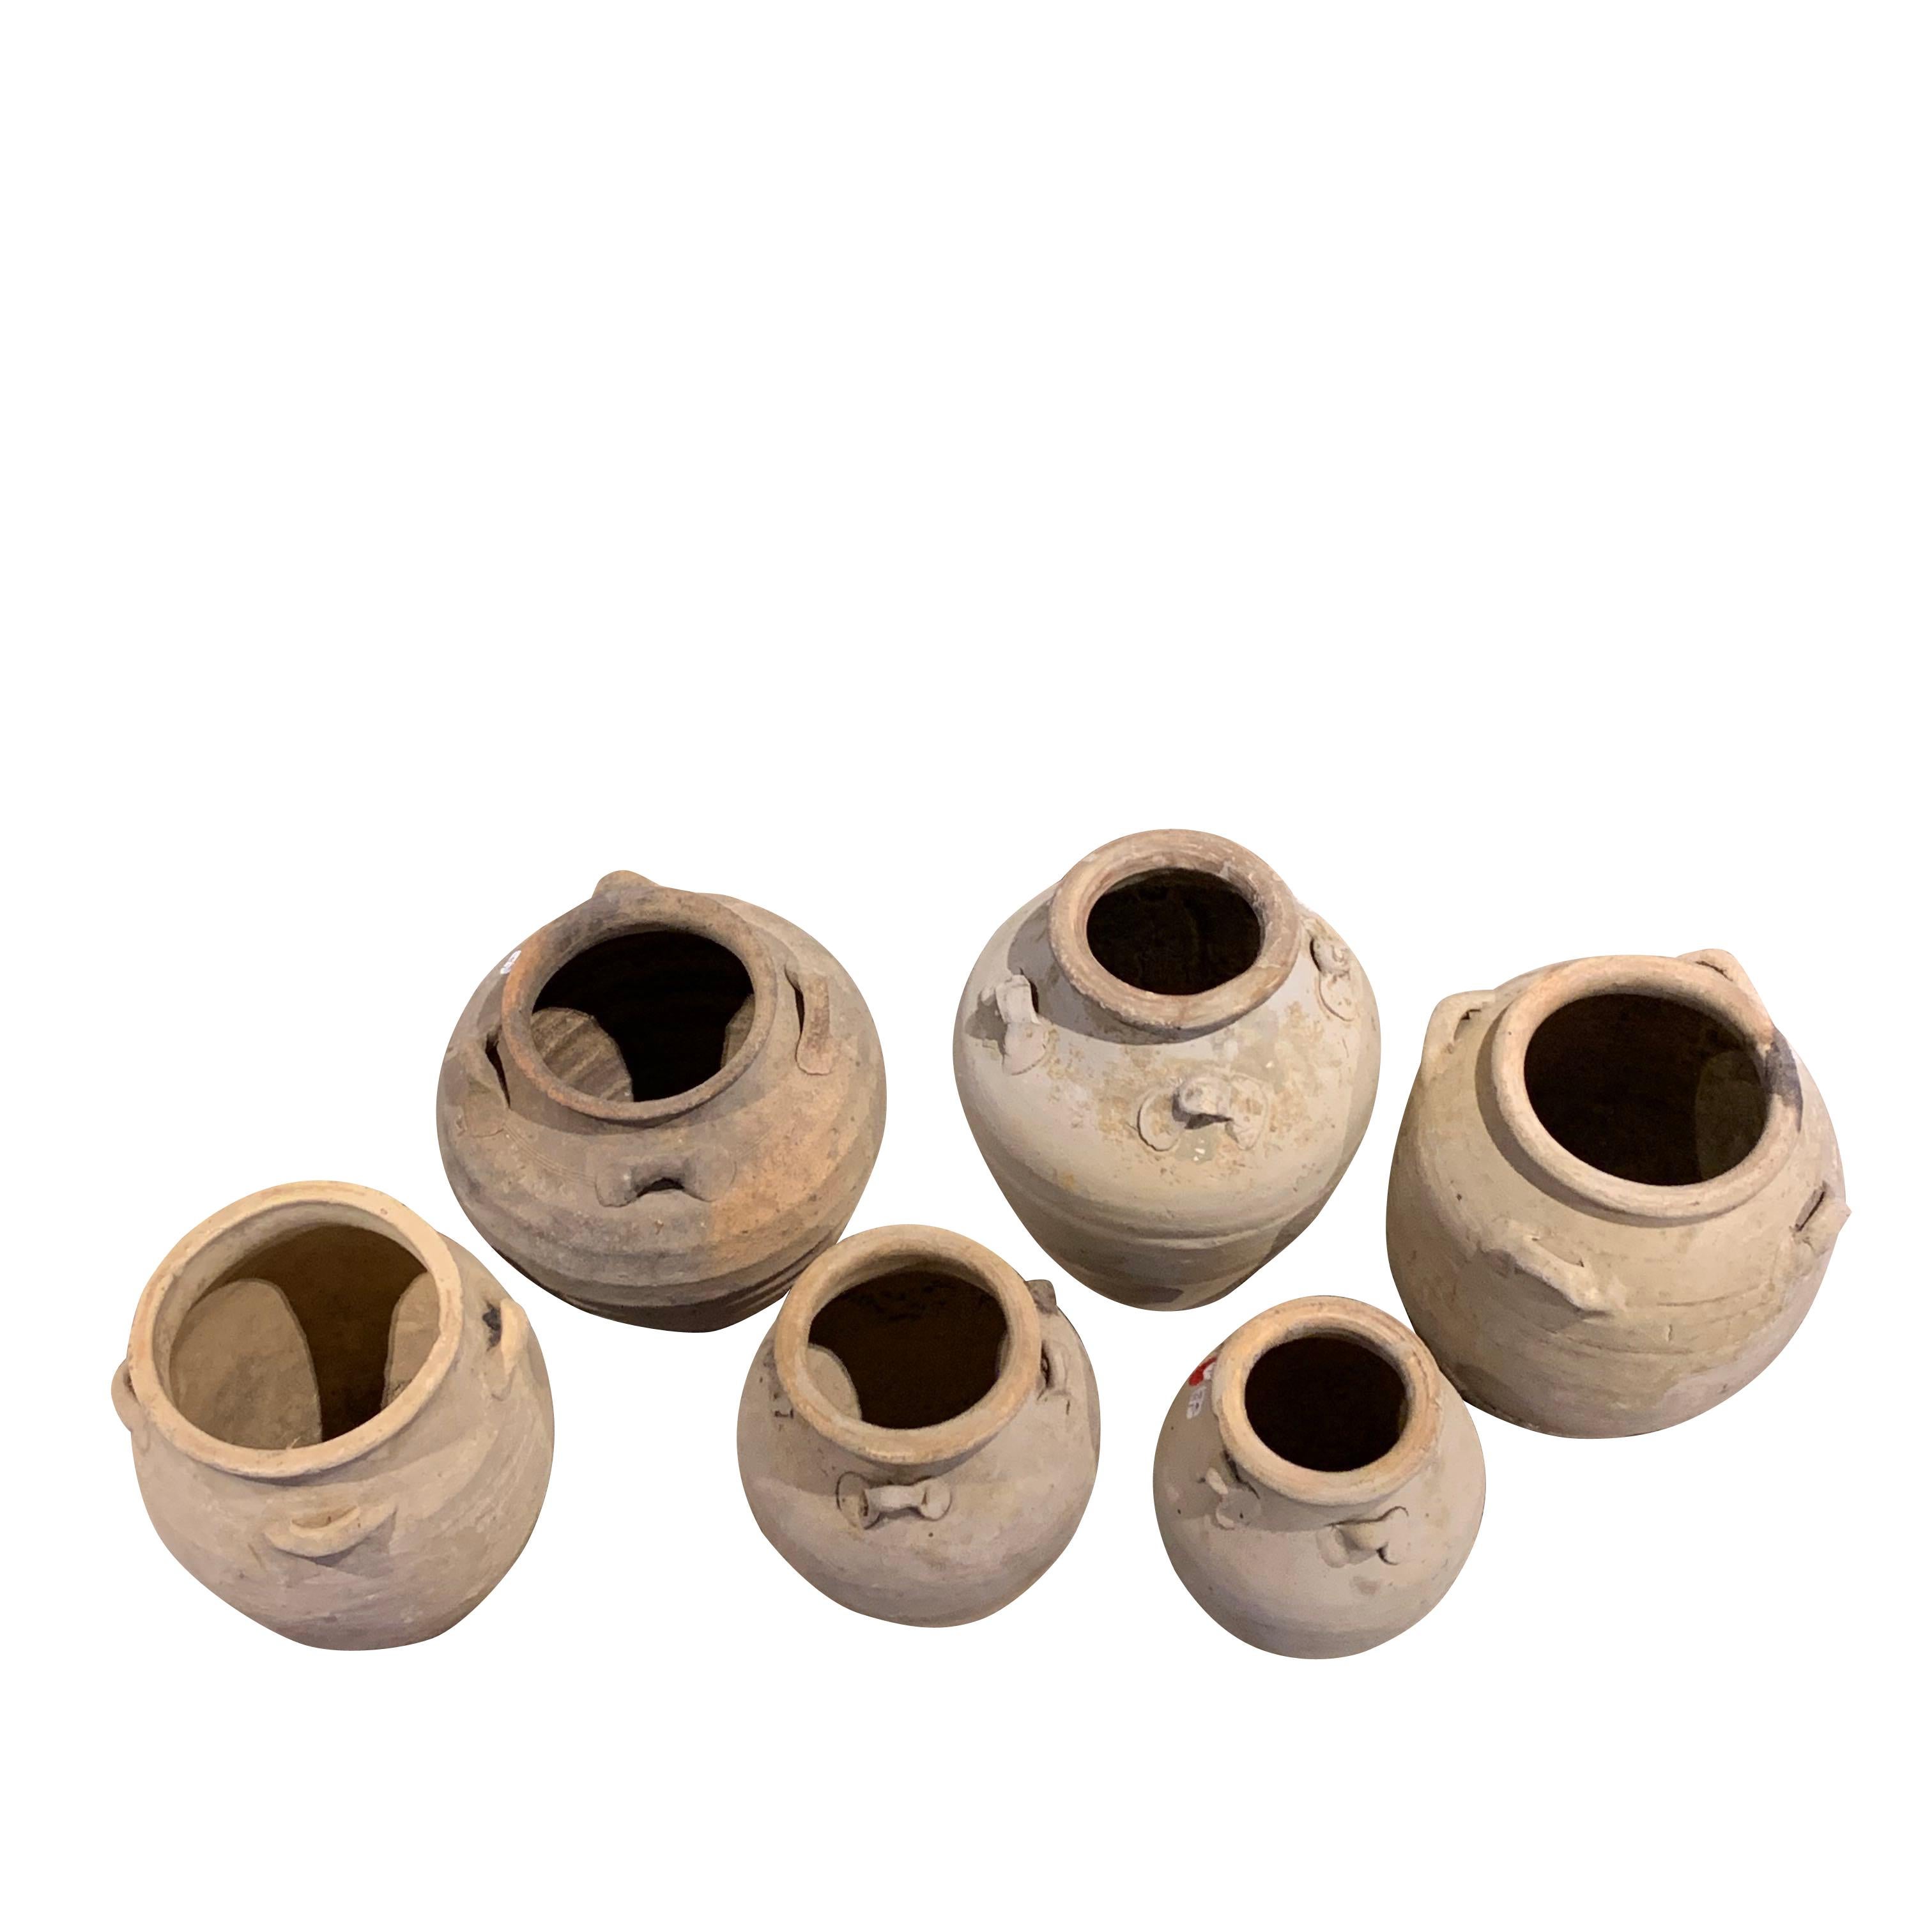 16th century Vietnamese collection of terracotta animist ship wrecked vases.
Natural weathered patina
Sizes range from 5